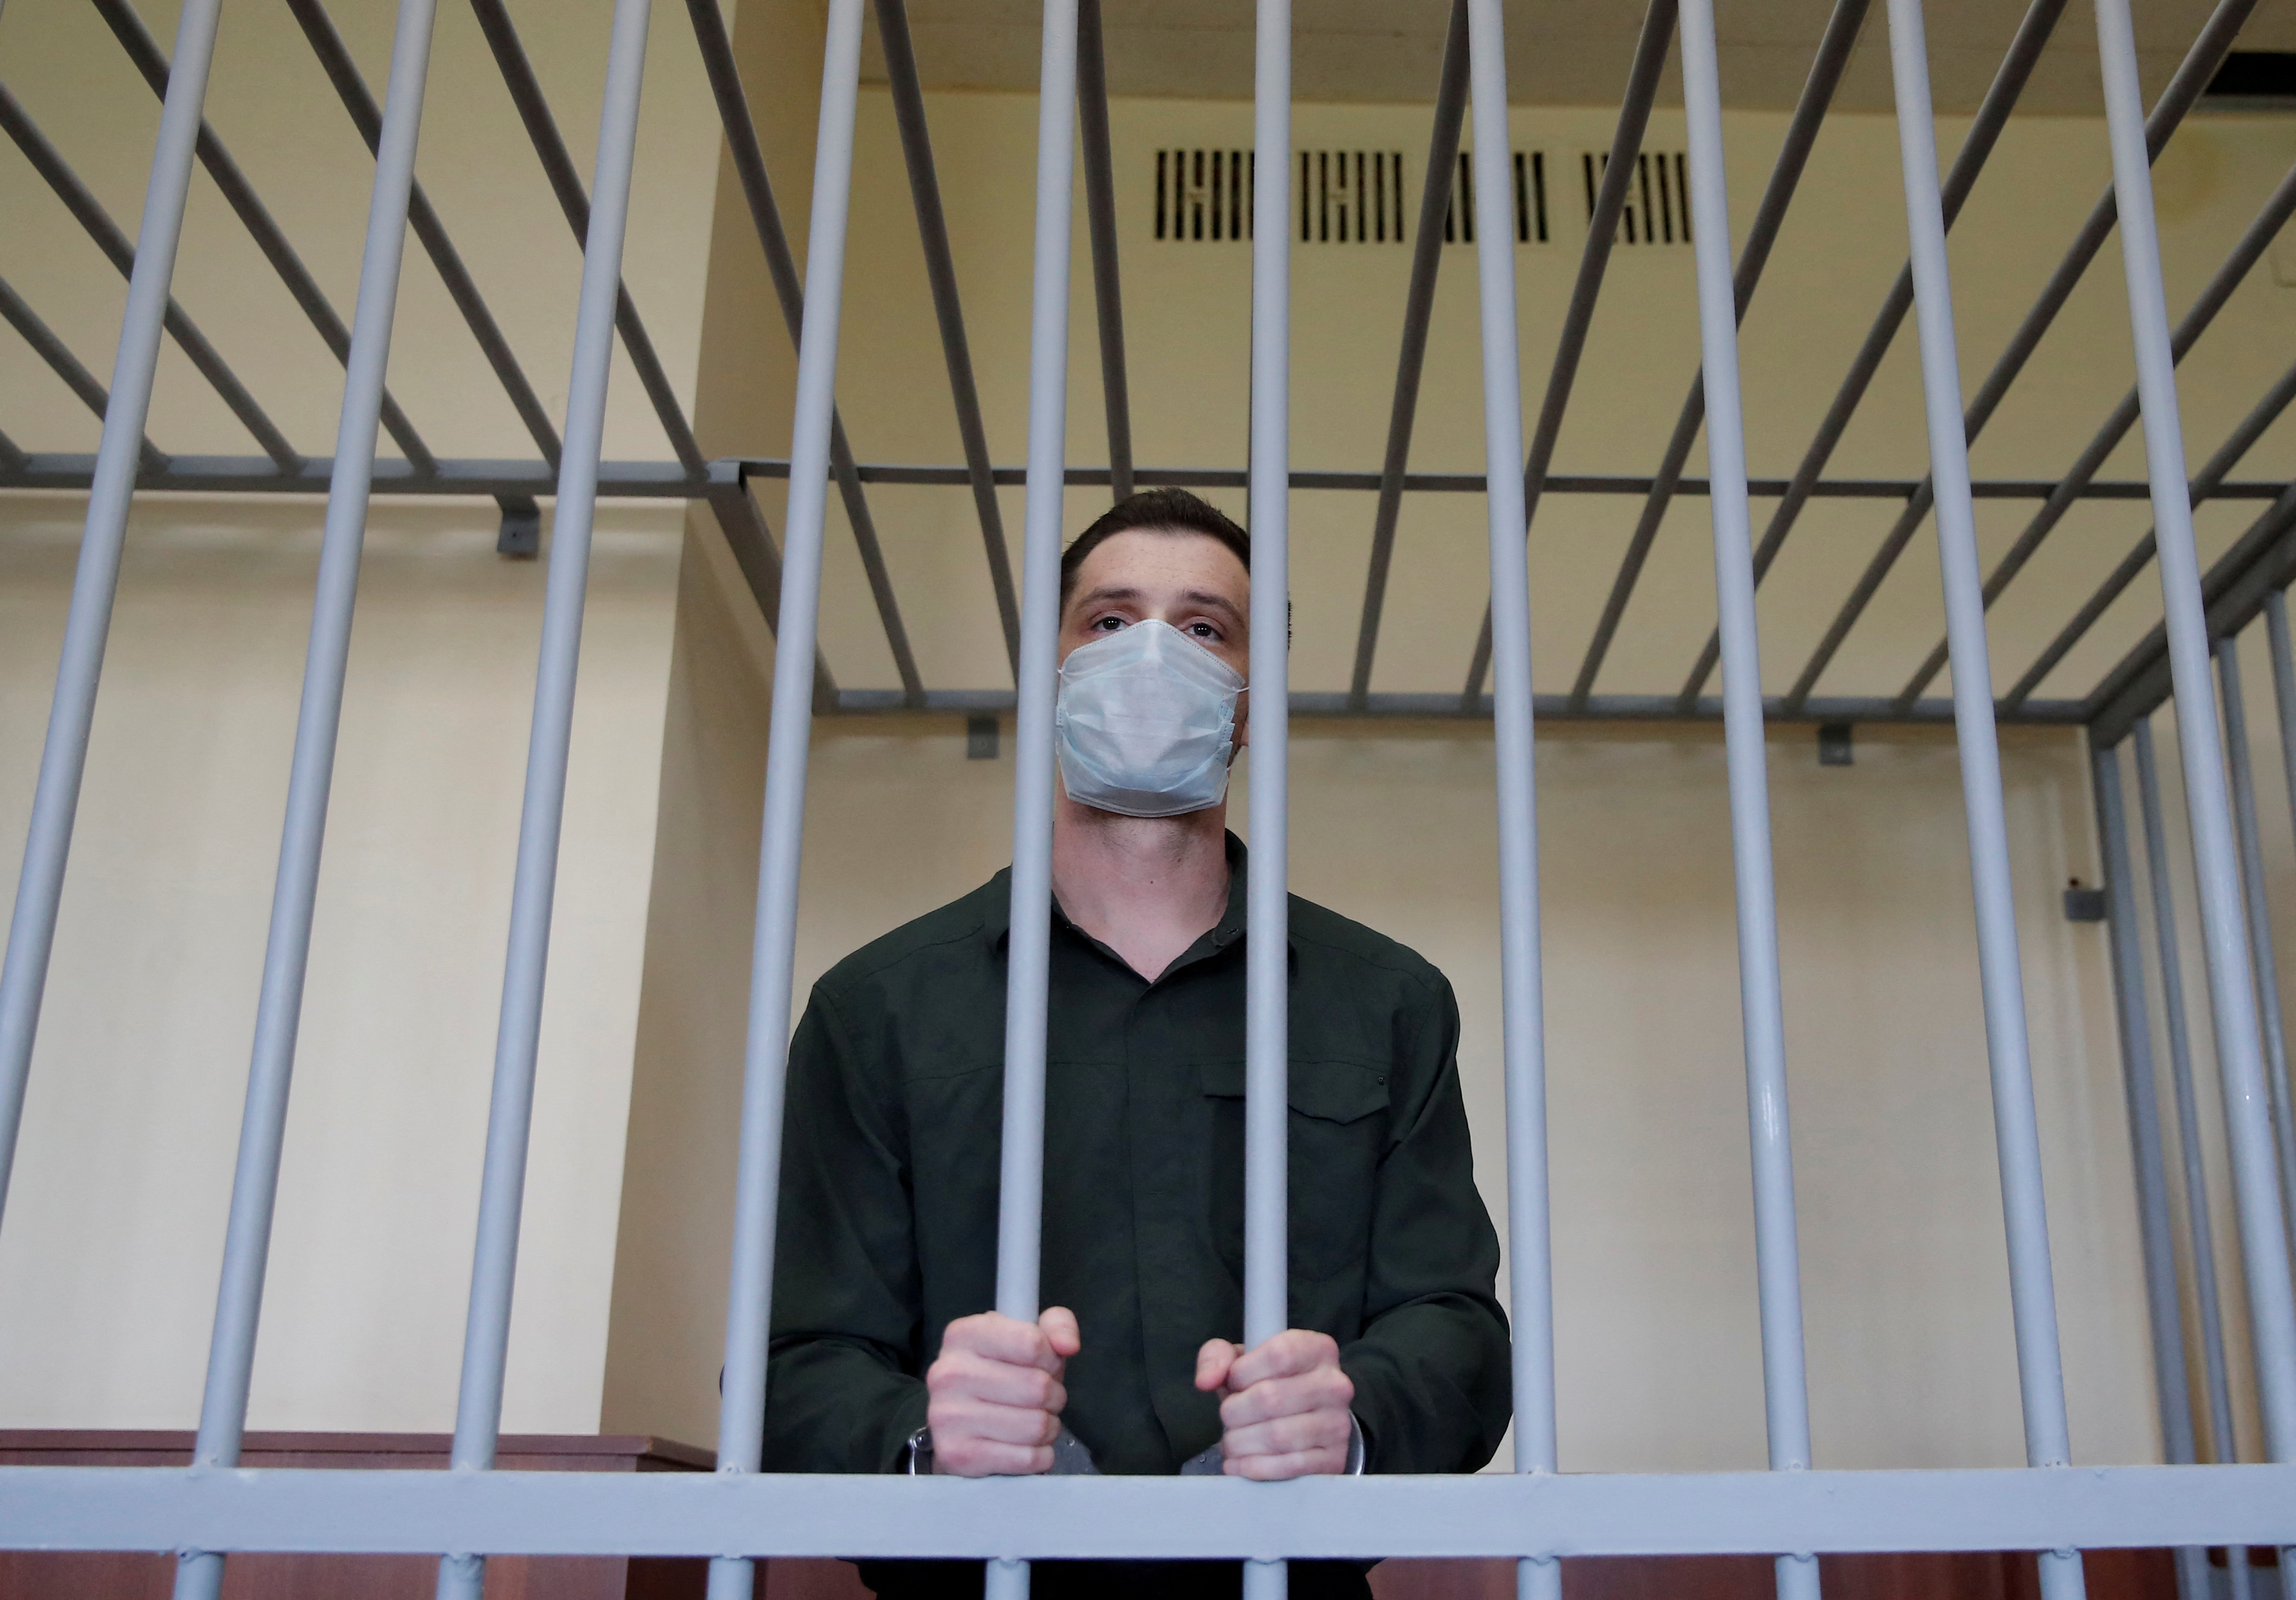 Former U.S. Marine Reed attends a court hearing in Moscow